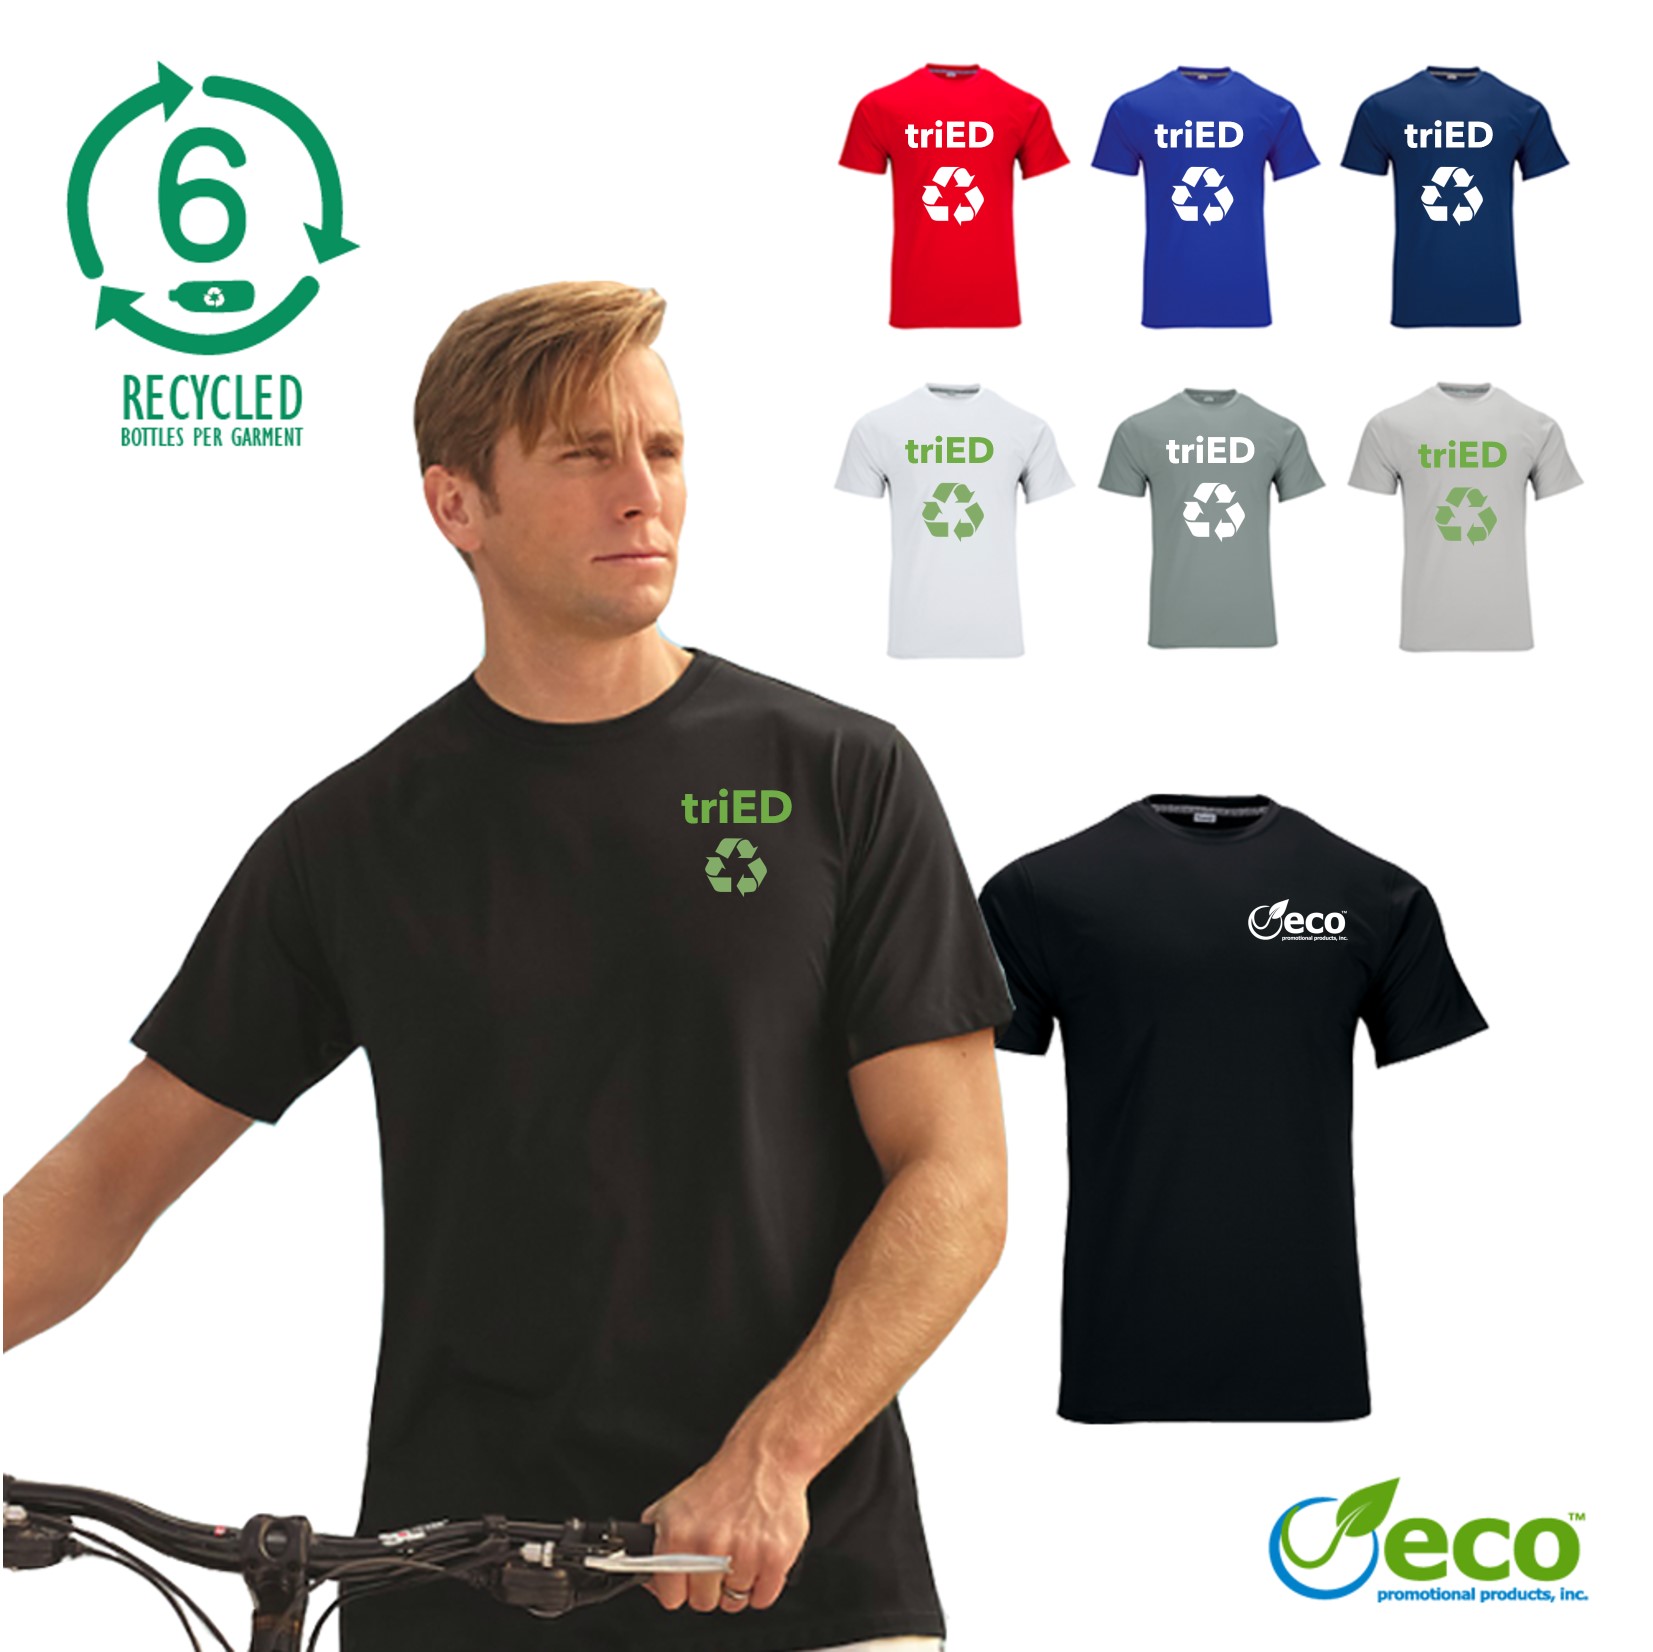 Recycled unisex short sleeve performance branded eco t-shirt